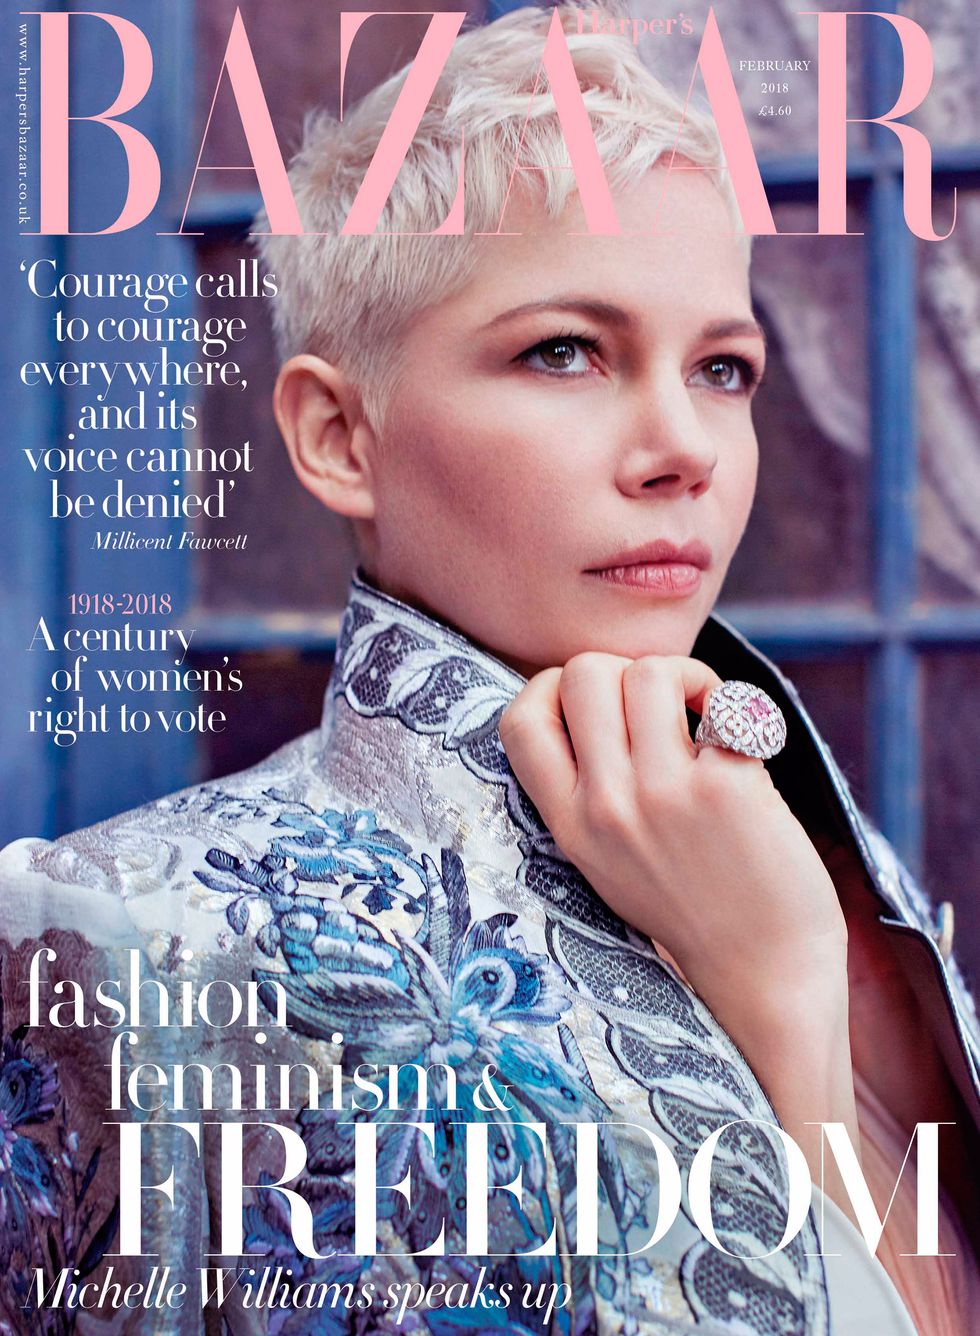 Michelle Williams on the newsstand cover